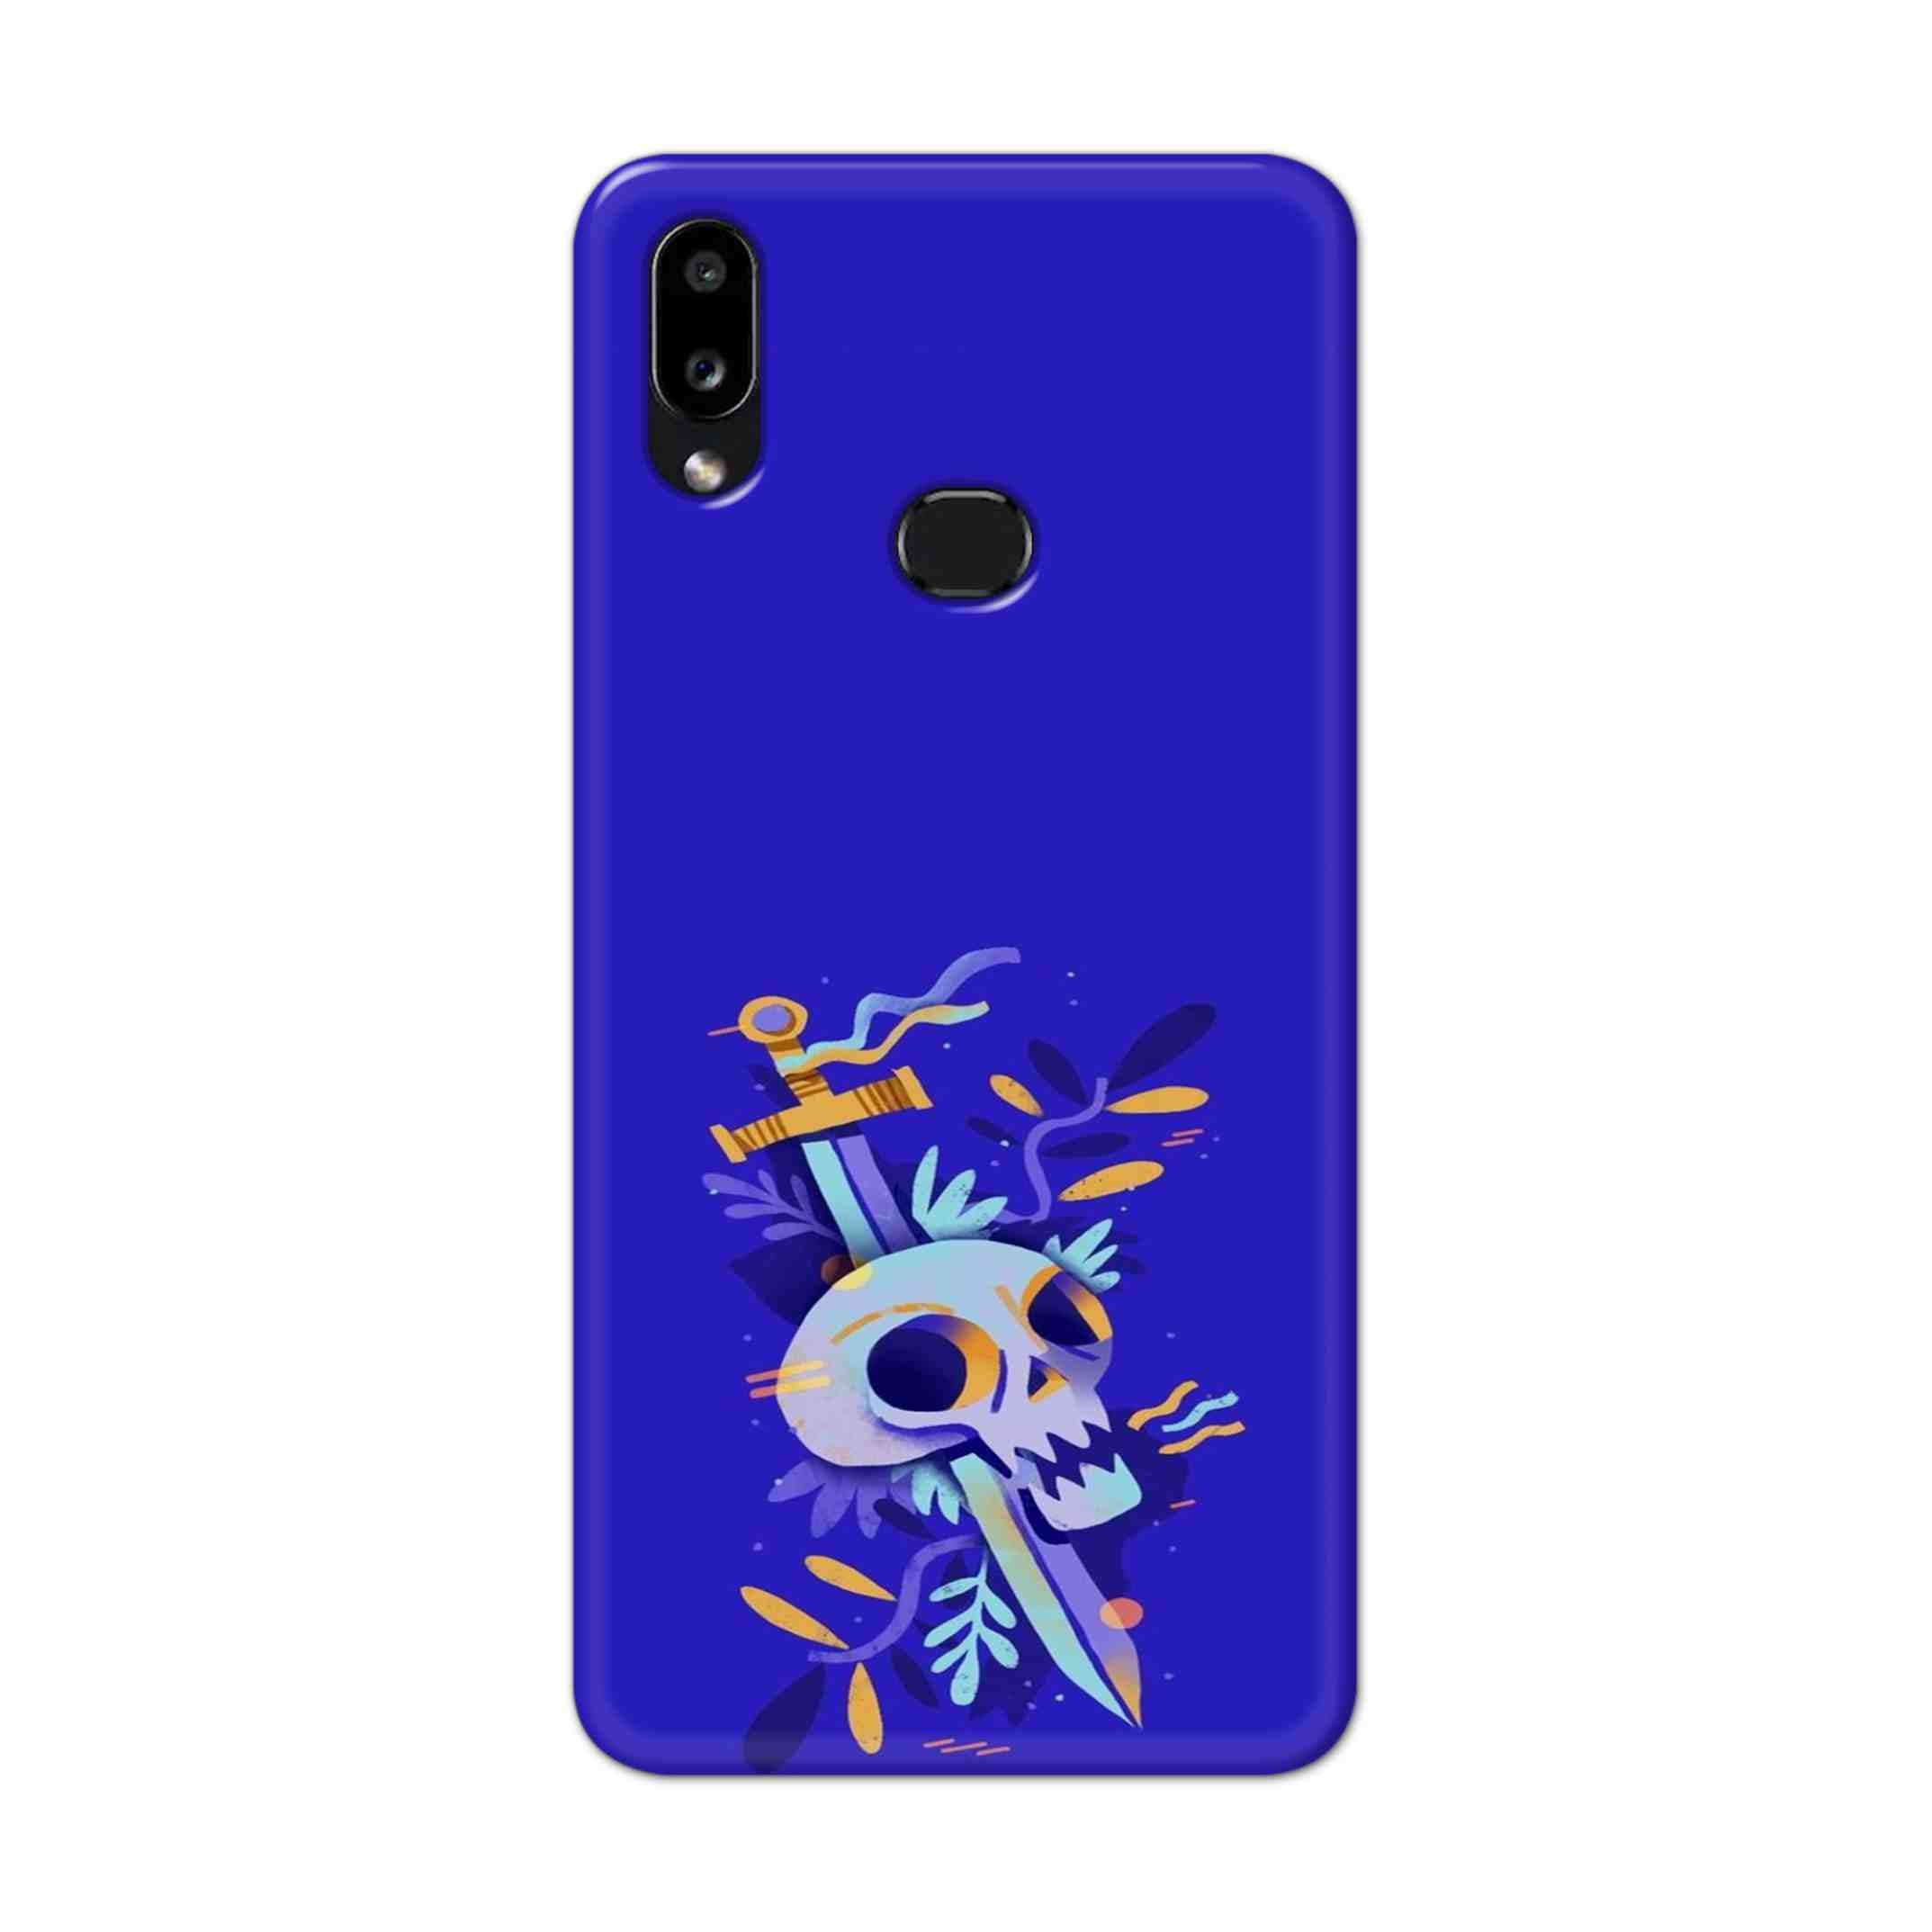 Buy Blue Skull Hard Back Mobile Phone Case Cover For Samsung Galaxy M01s Online